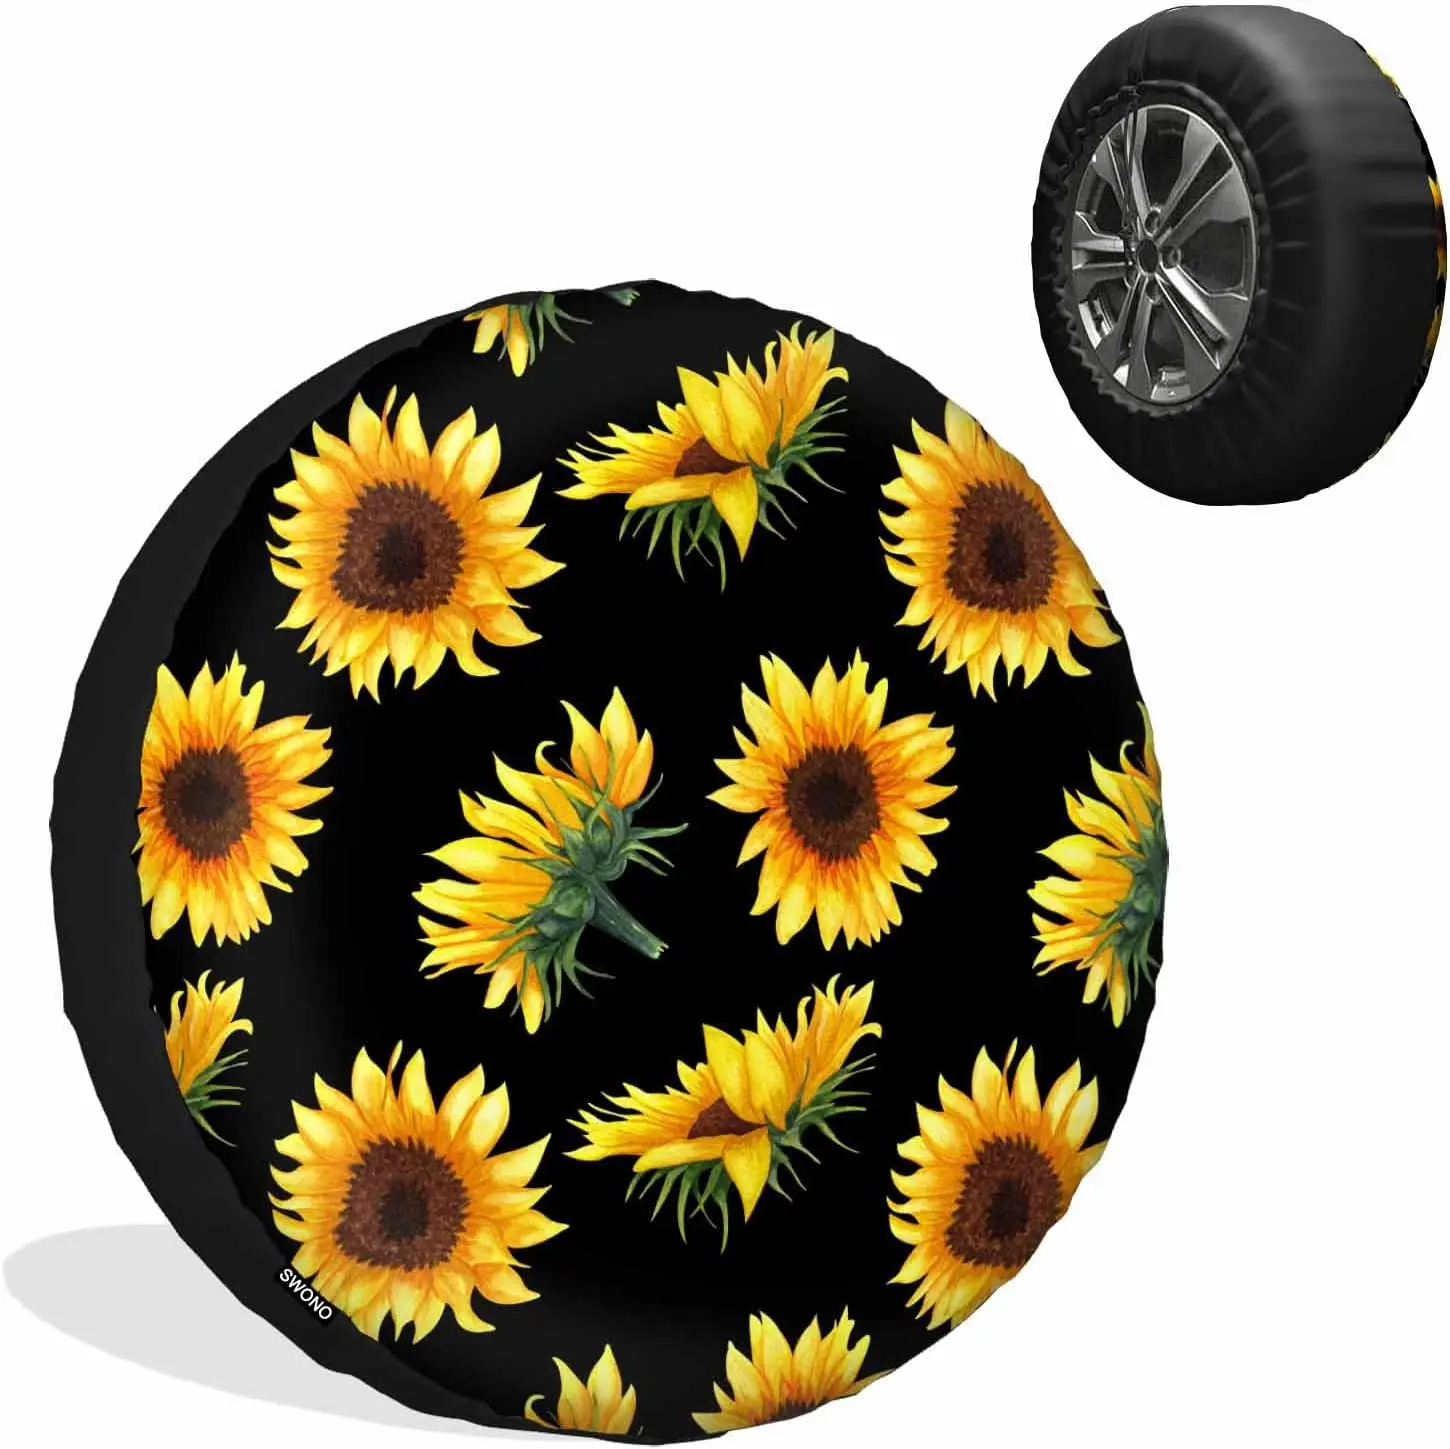 

Sunflowers Spare Tire Covers Wheel Guards Weatherproof Camping Trailer Universal Fits Tires for Rv SUV Truck Camper Travel